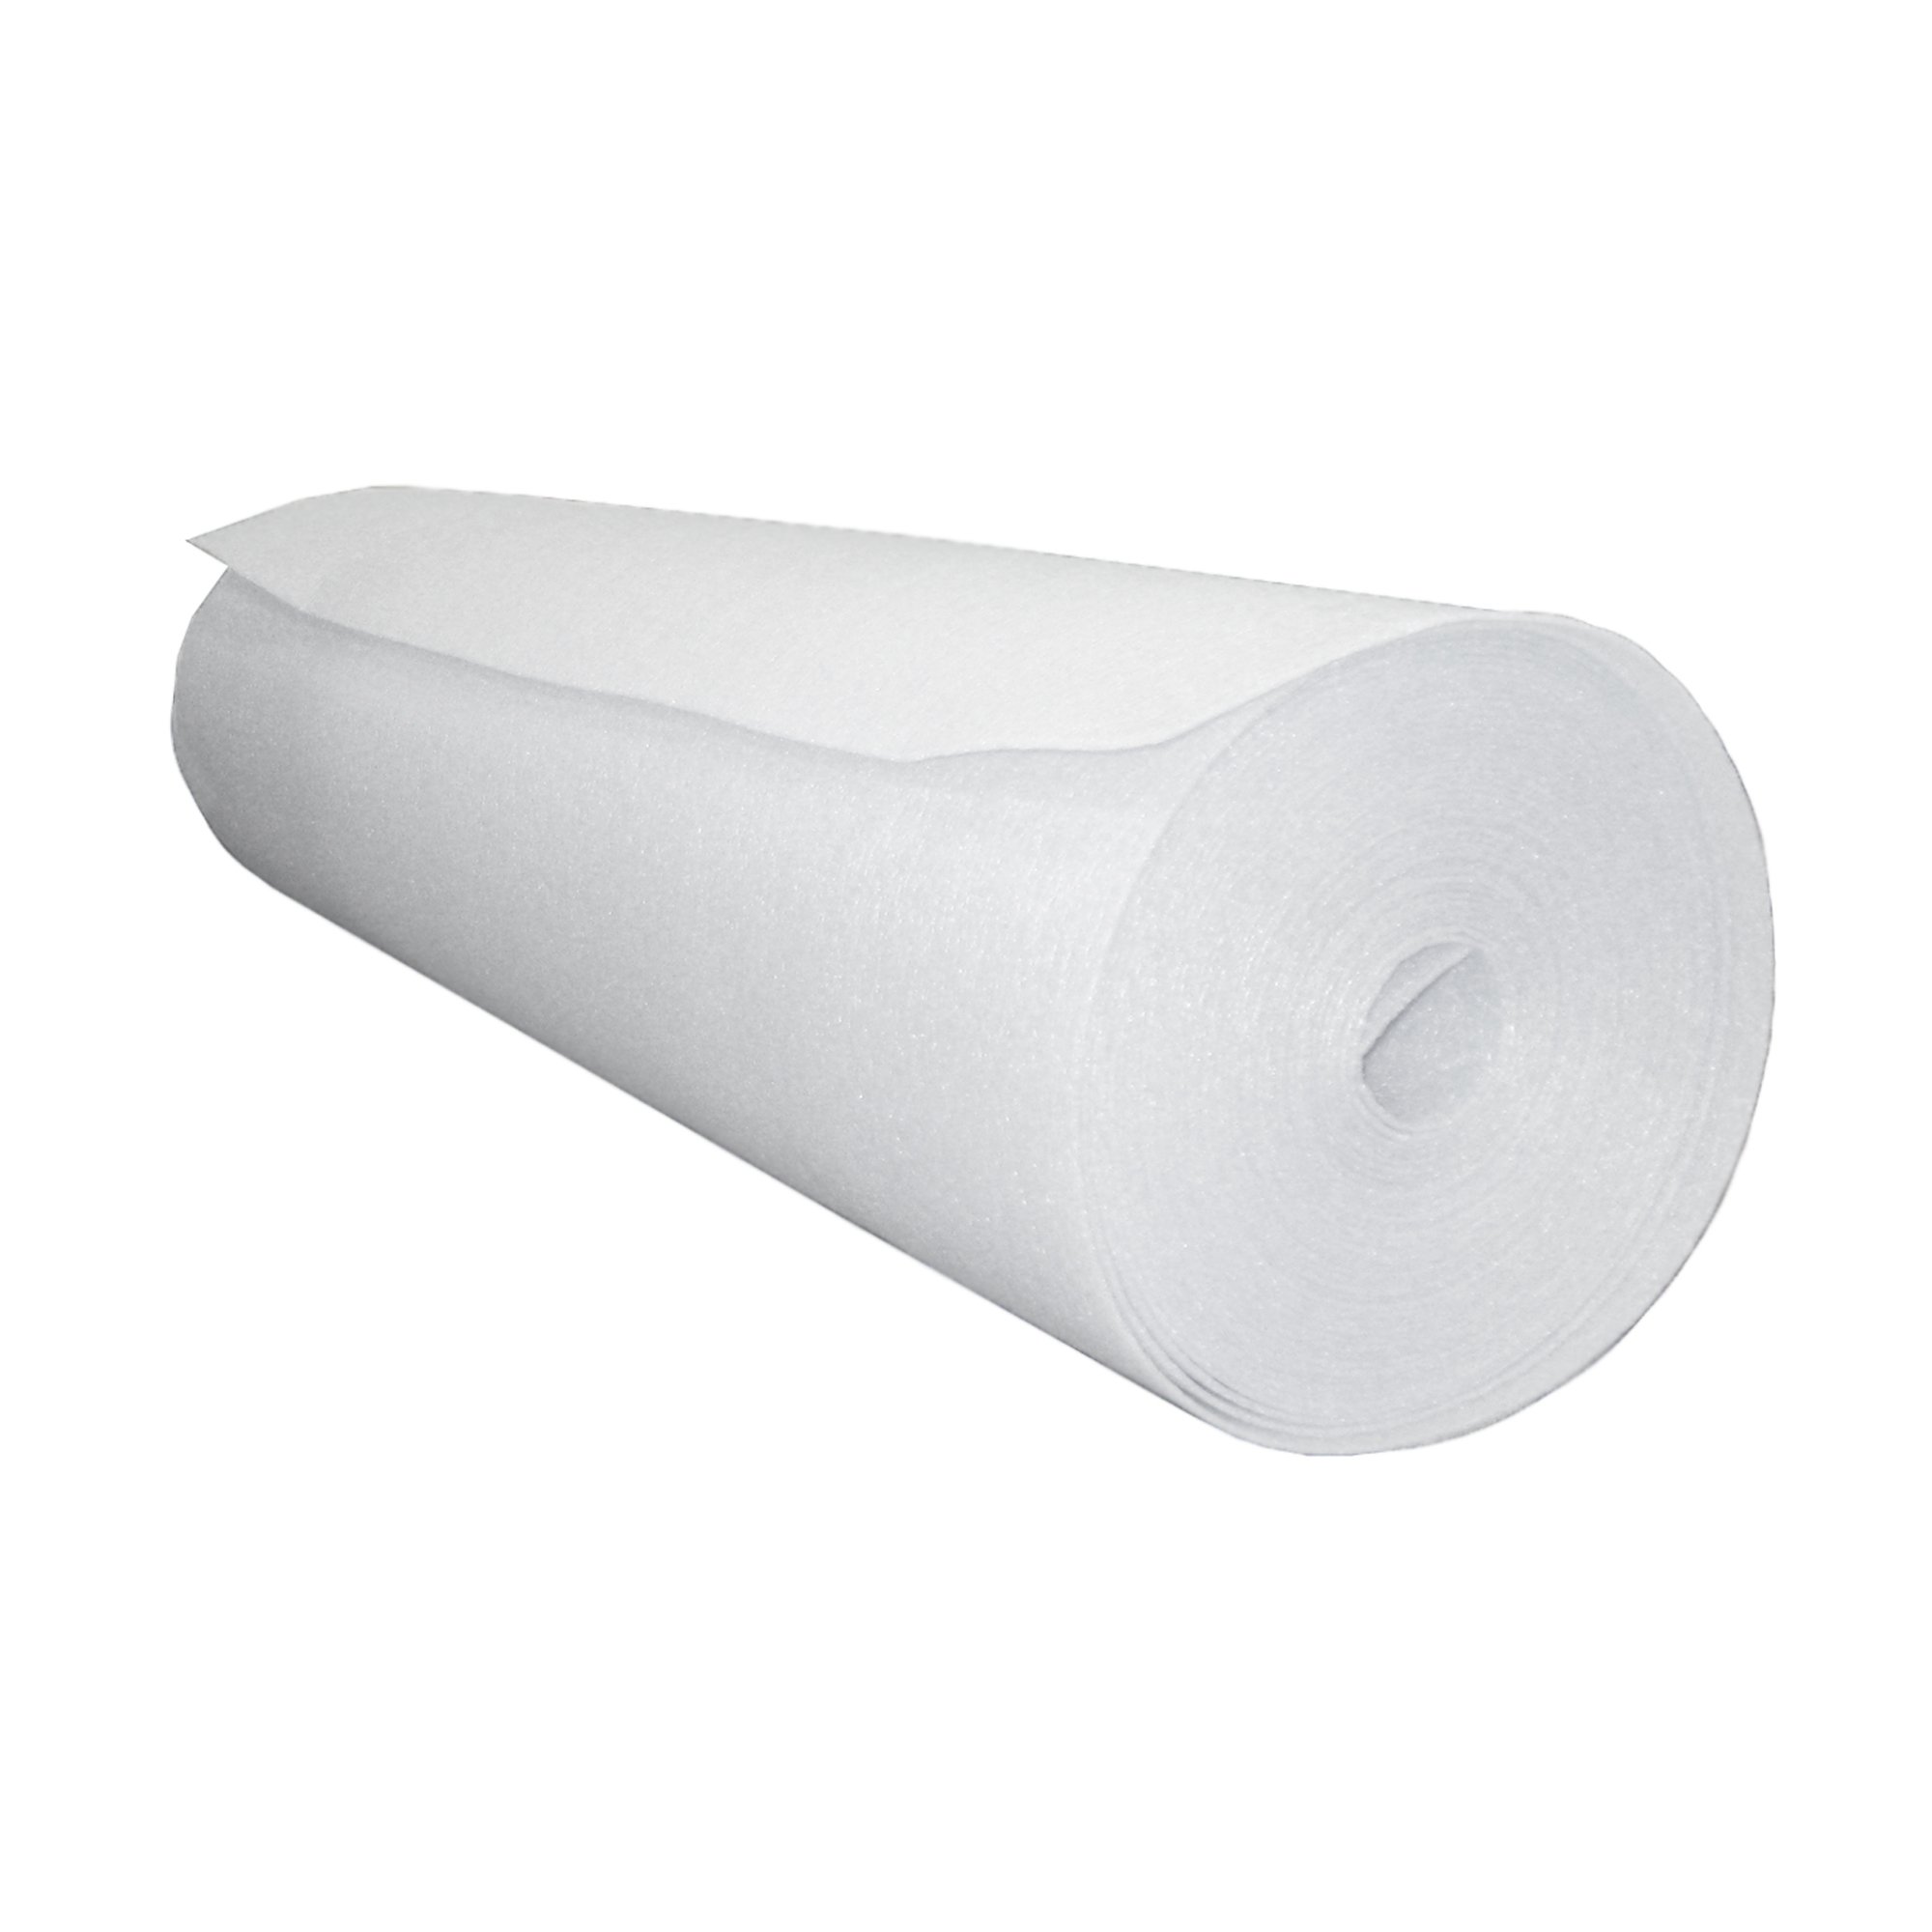 gladon 100-Feet Roll Above ground Pool Wall Foam - 18 in x 48 in White